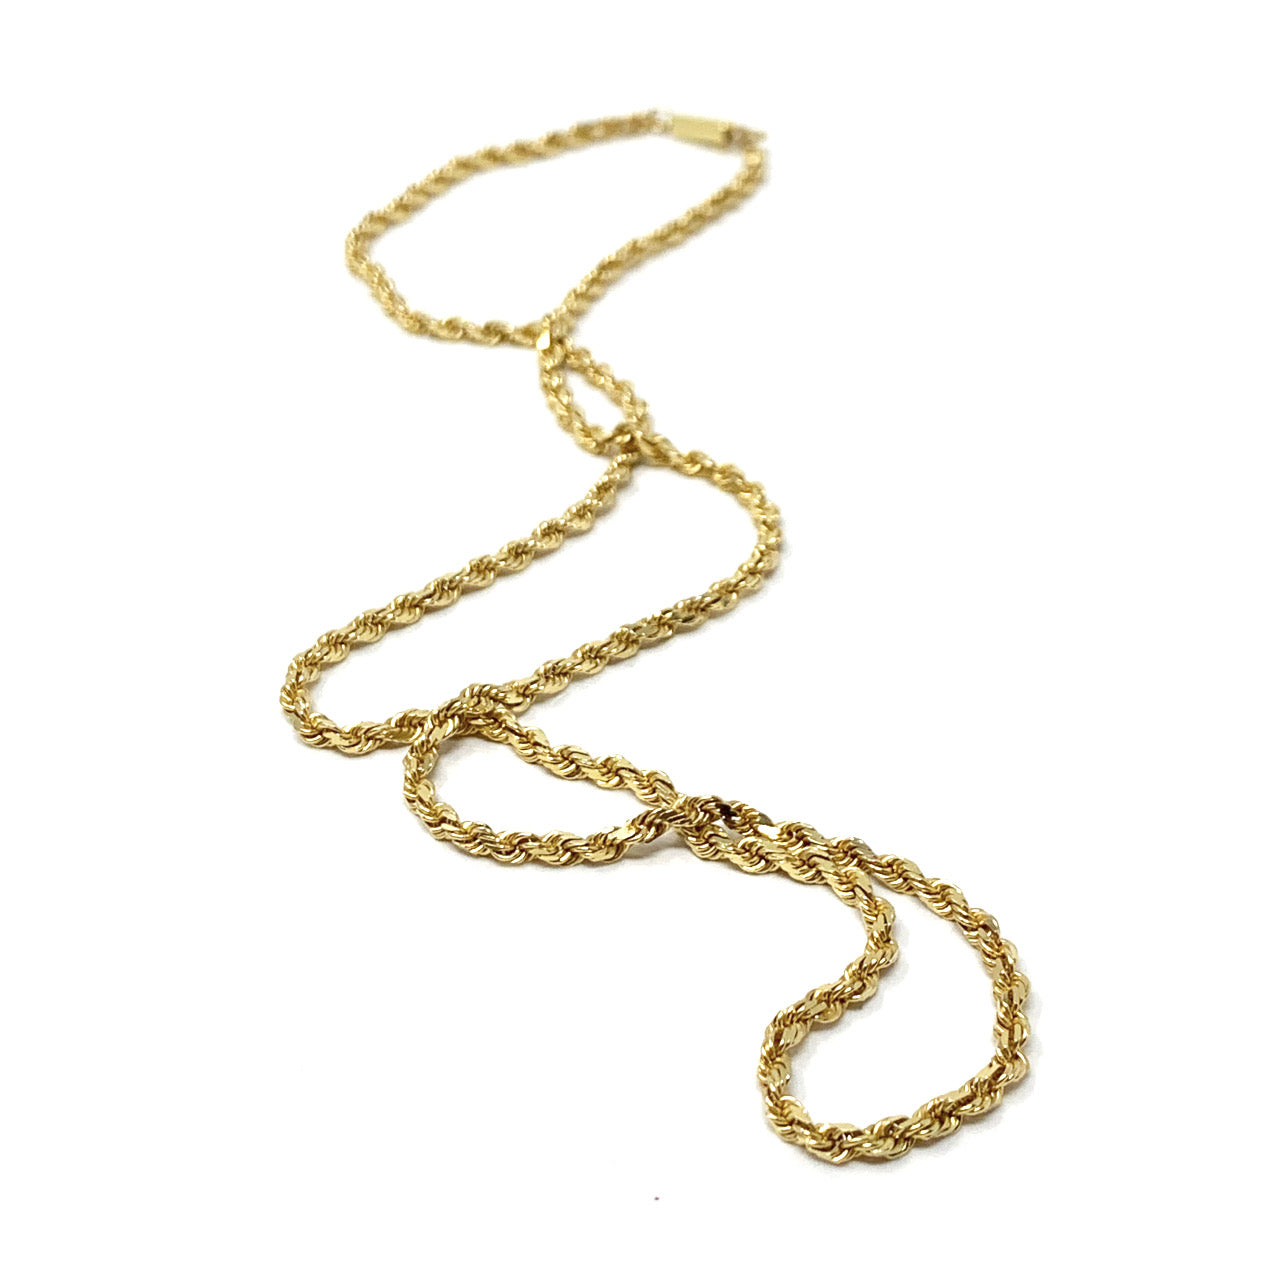 18K Gold 3mm Diamond Cut Rope Necklace W/ Safety